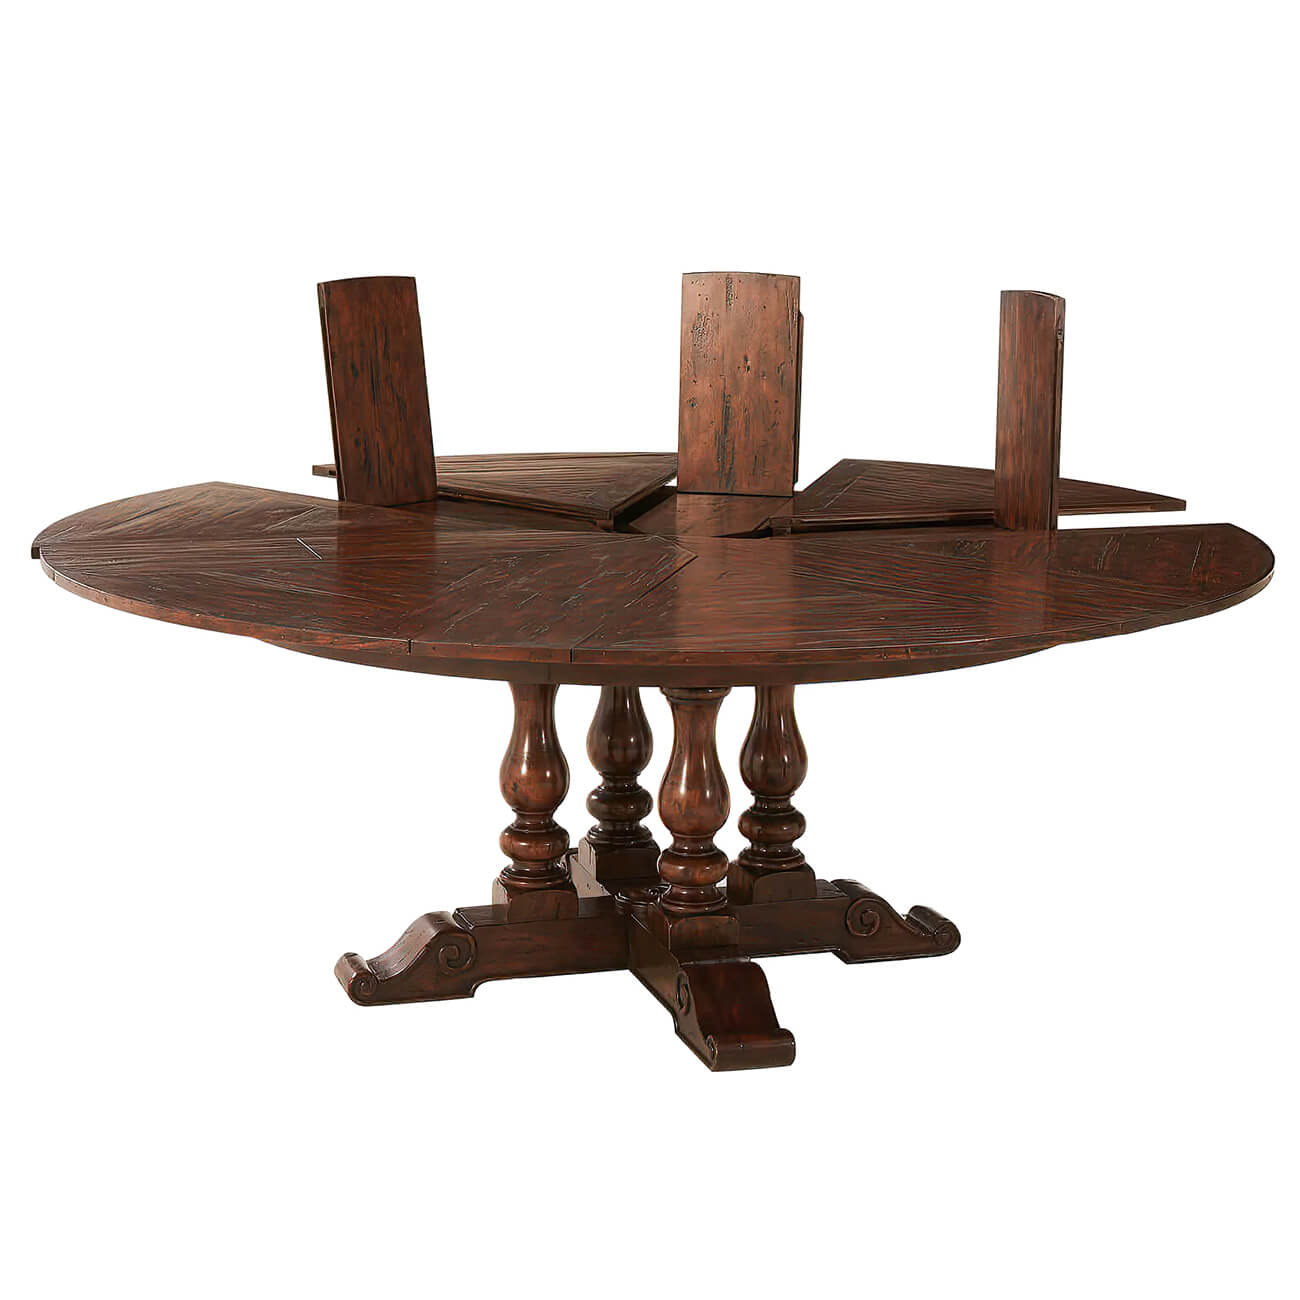 Early English Style Round Extension Dining Table 78 - English Georgian America